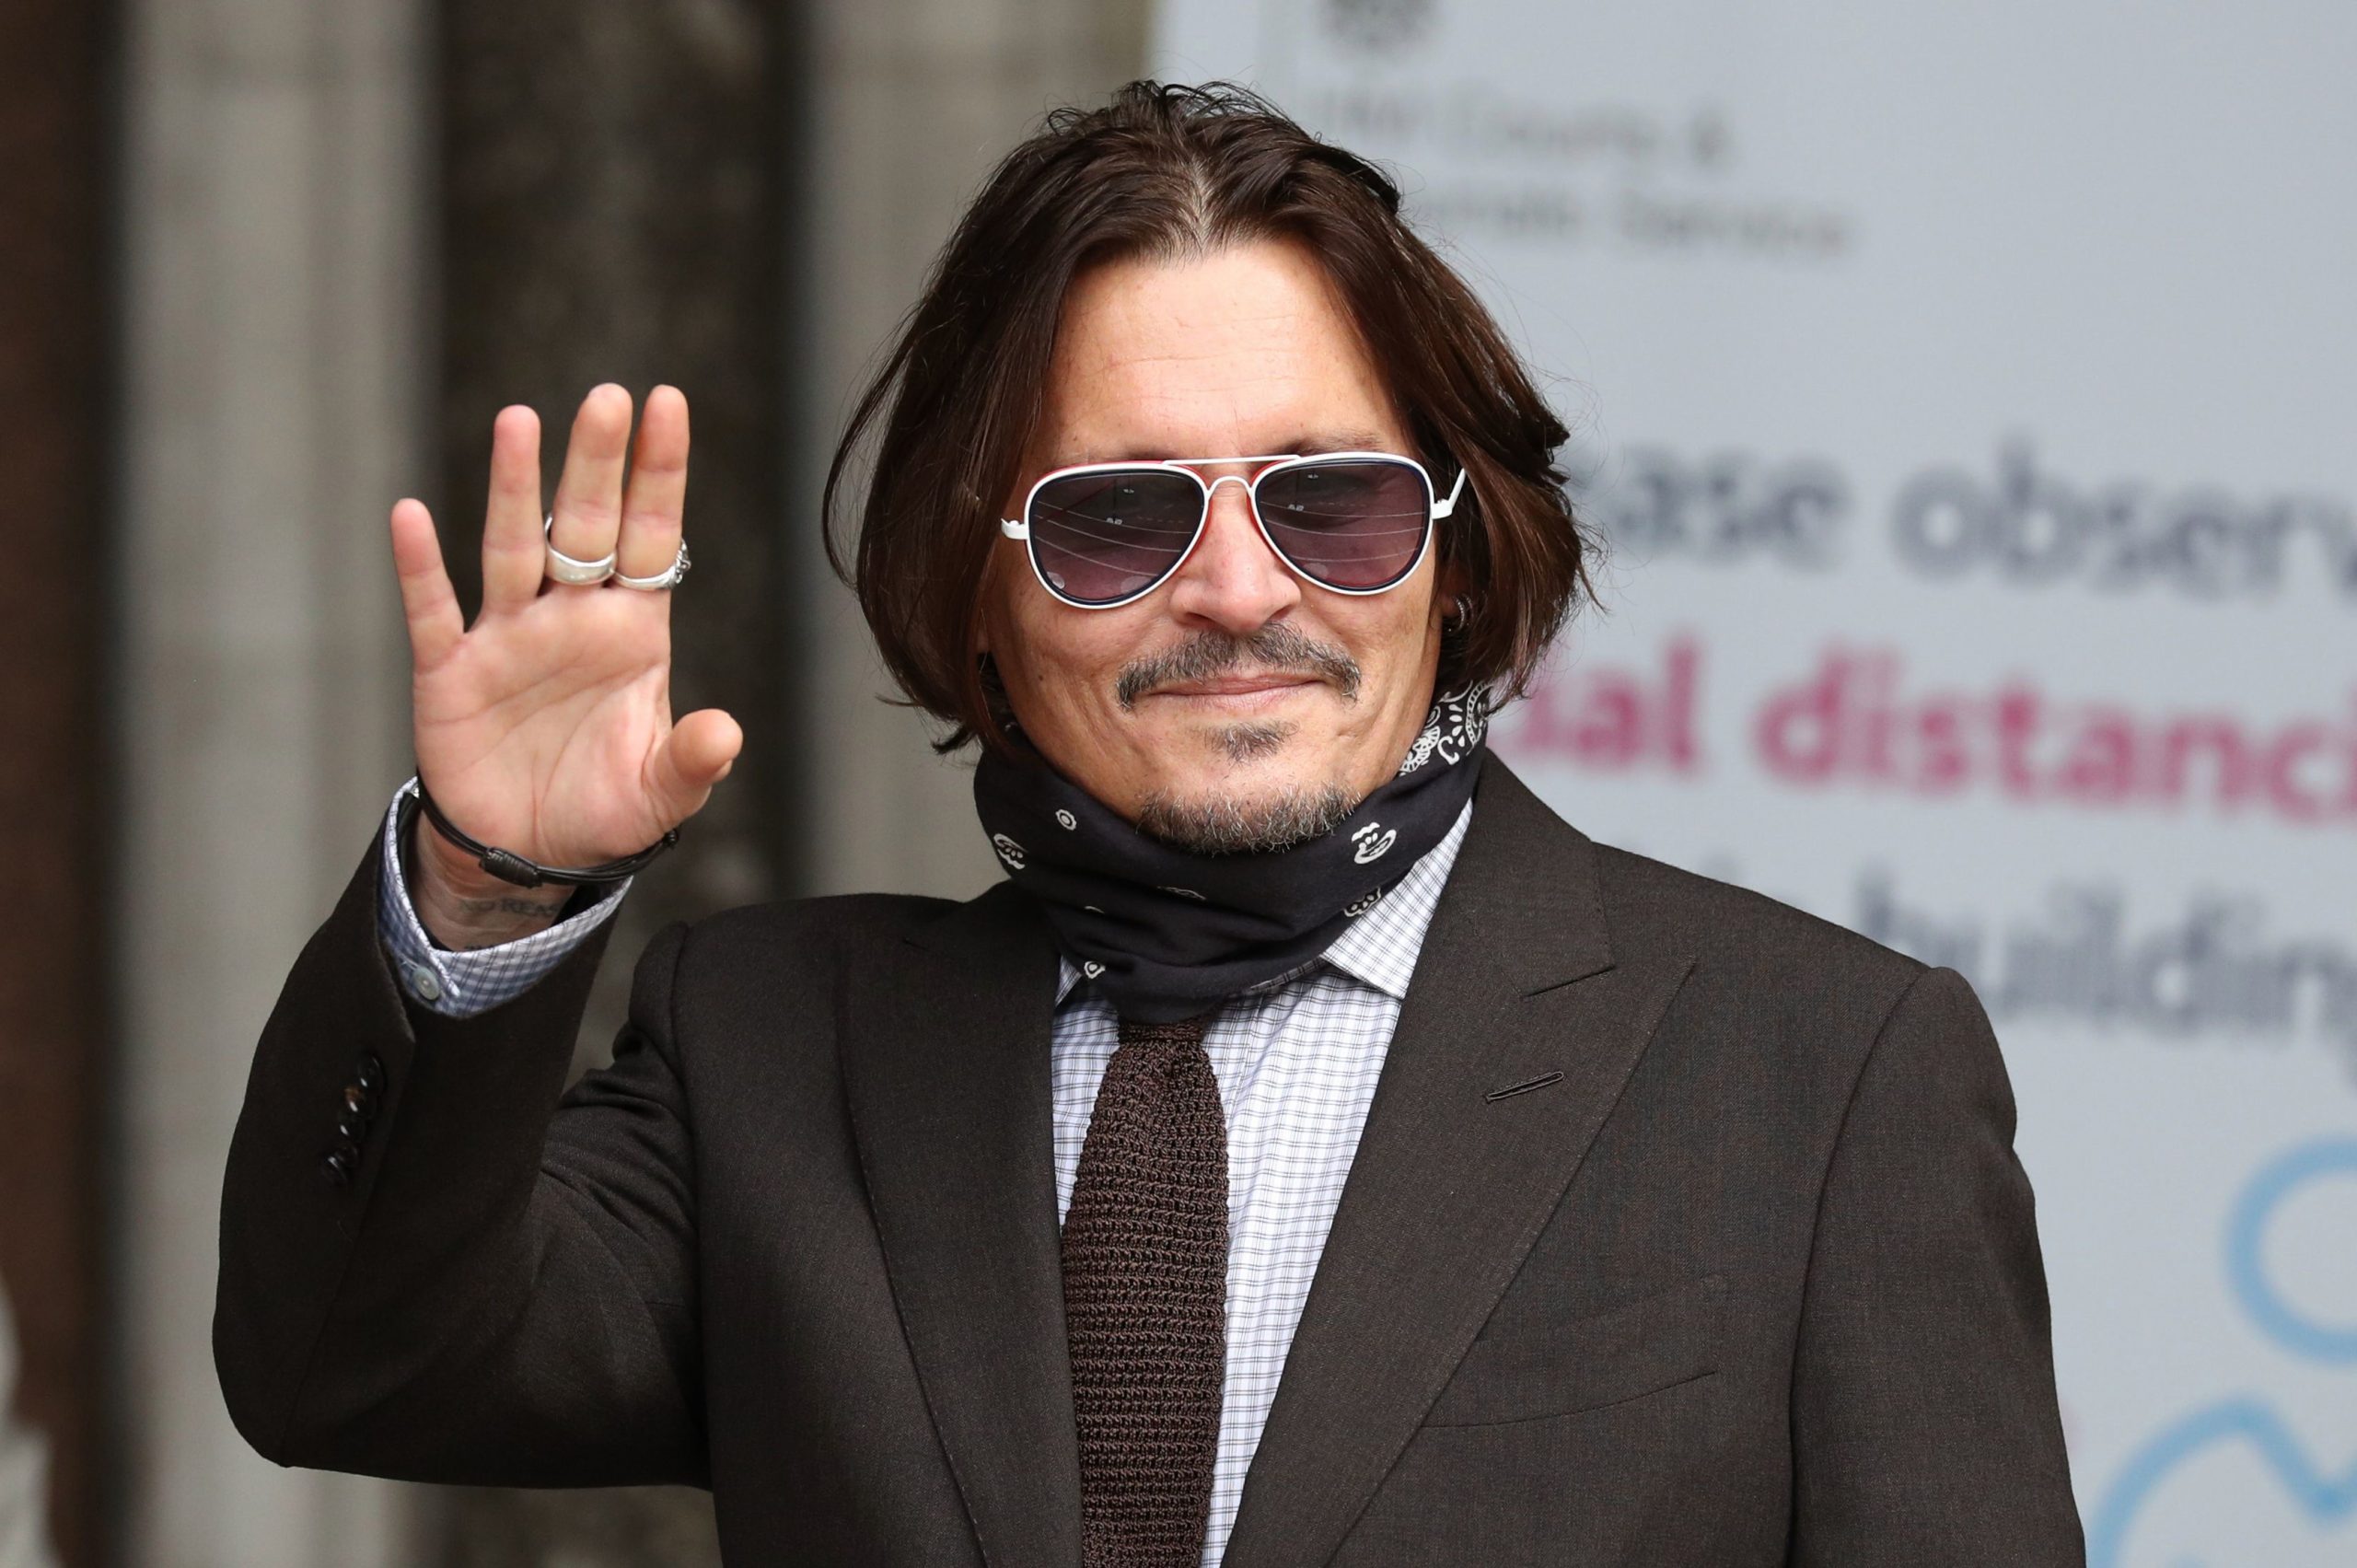 Johnny Depp may receive $ 50 million from Amber Heard if his defamation lawsuit is upheld